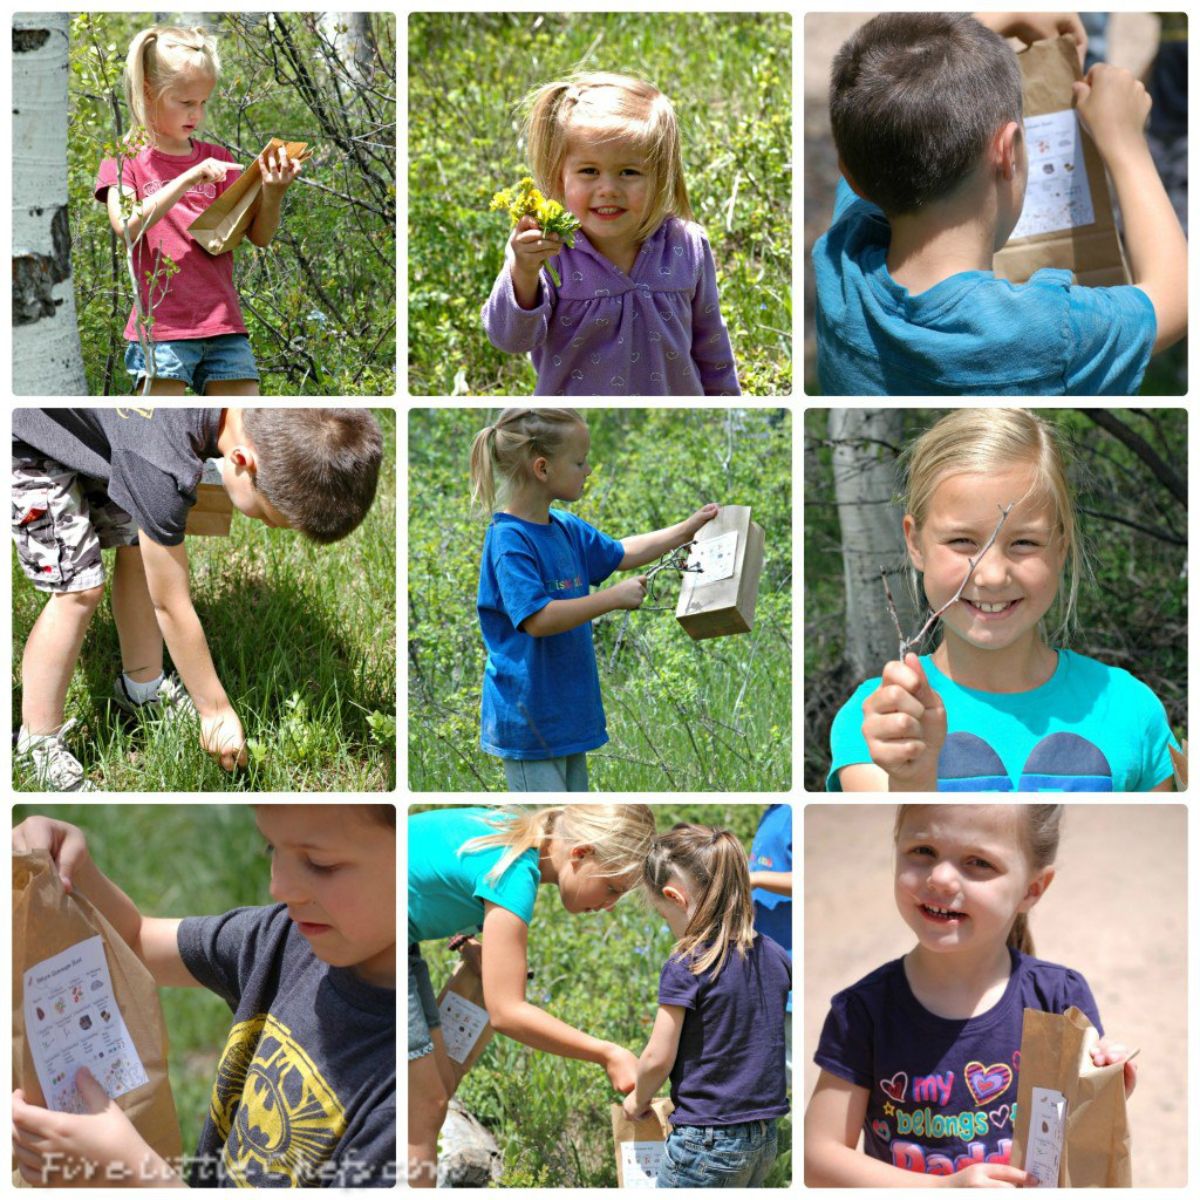 Collage of children playing a scavenger game outdoor.